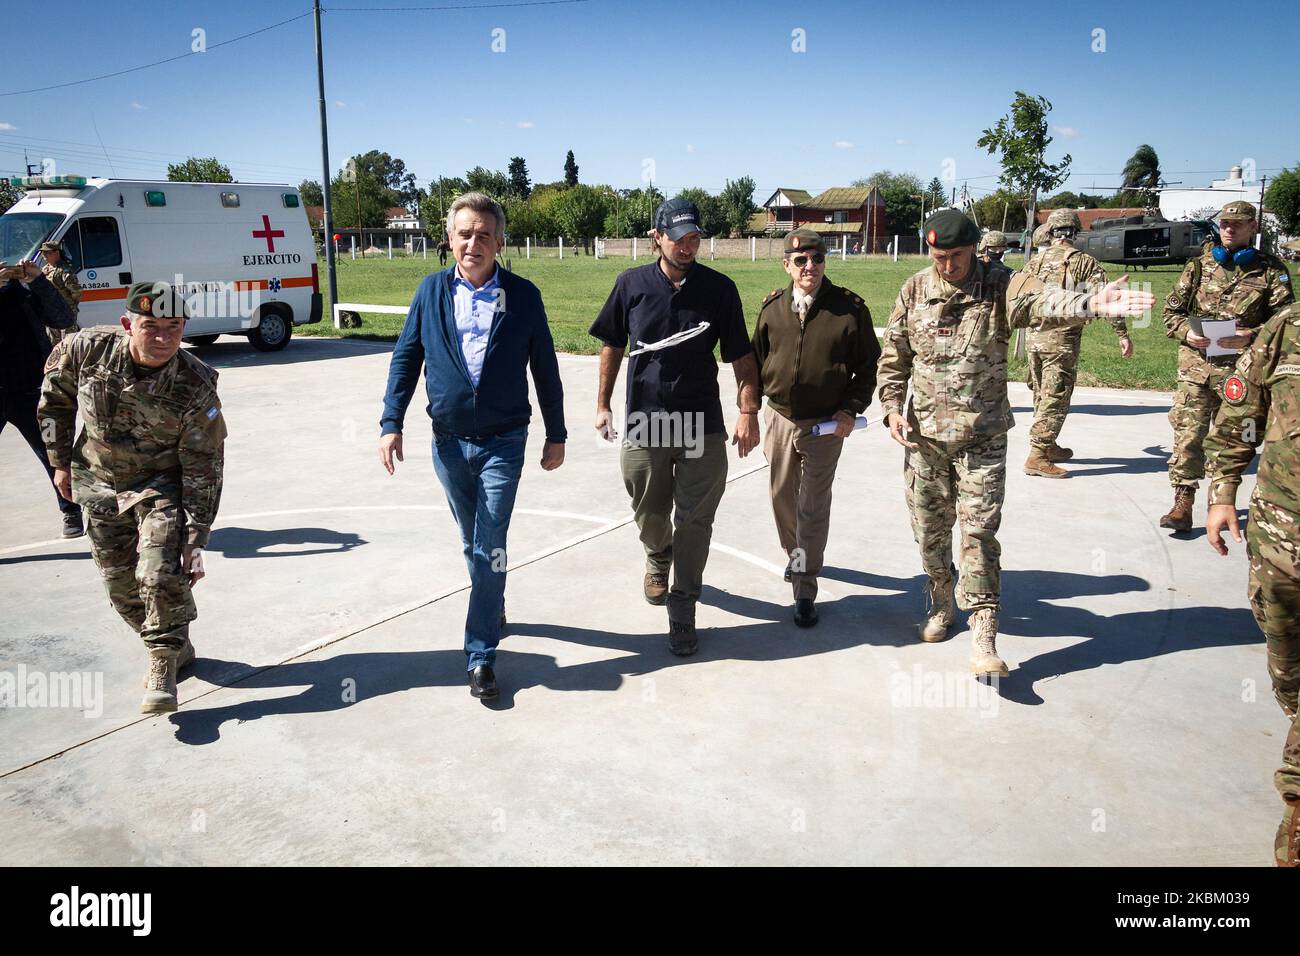 Defense Minister Agustin Rossi with the Army's Flat Mayo arriving by  helicopter at the ''San Jose'' Training Center in the neighborhood known as  Puerta de Hierro in the town of Isidro Casanova,